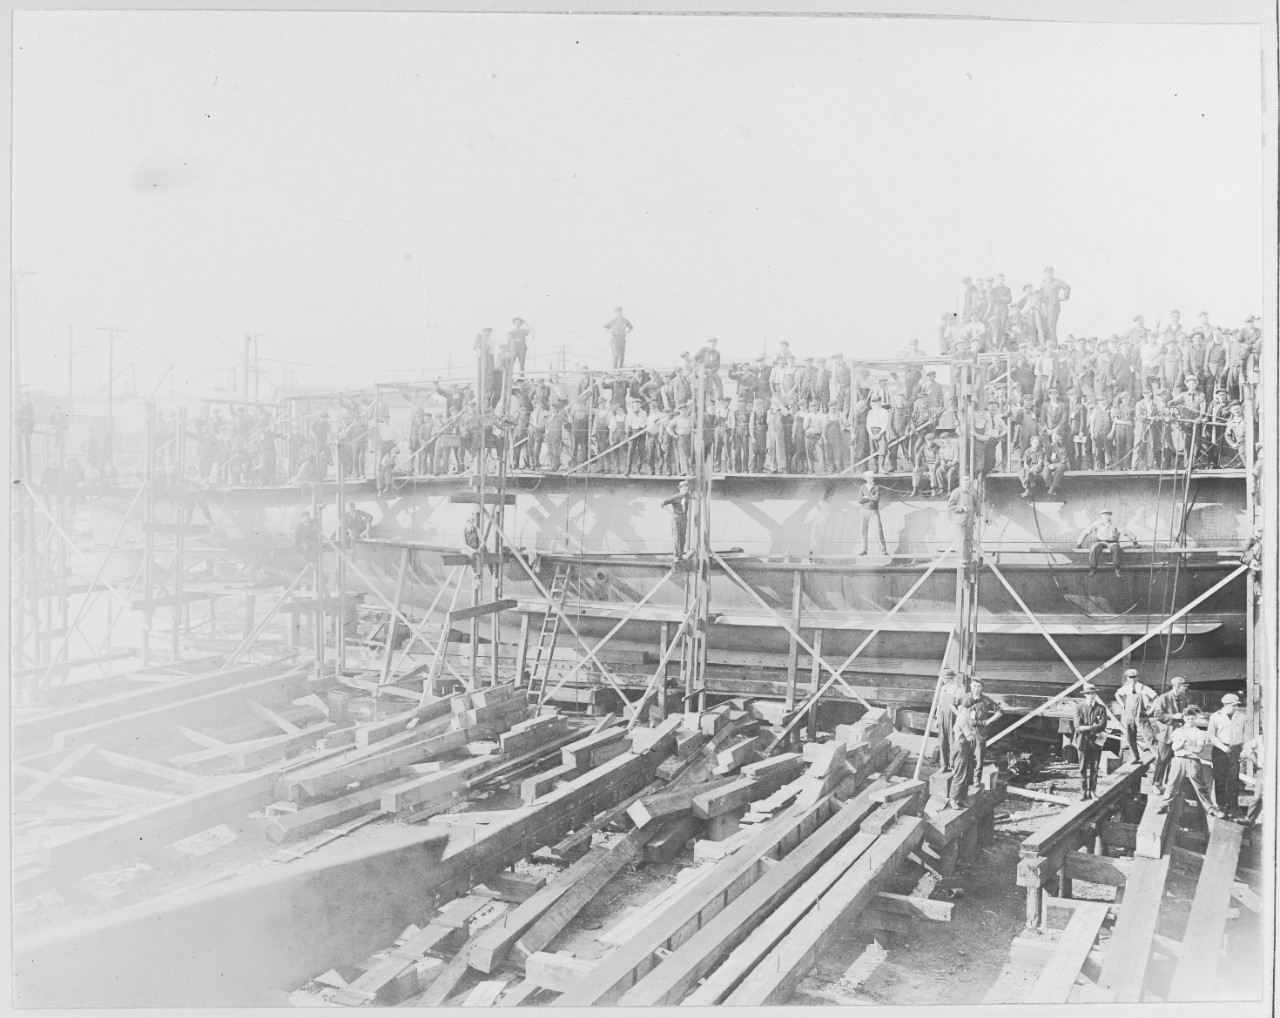 Men standing with wood structure, Lake Torpedo Boat Company. Bridgeport, Connecticut